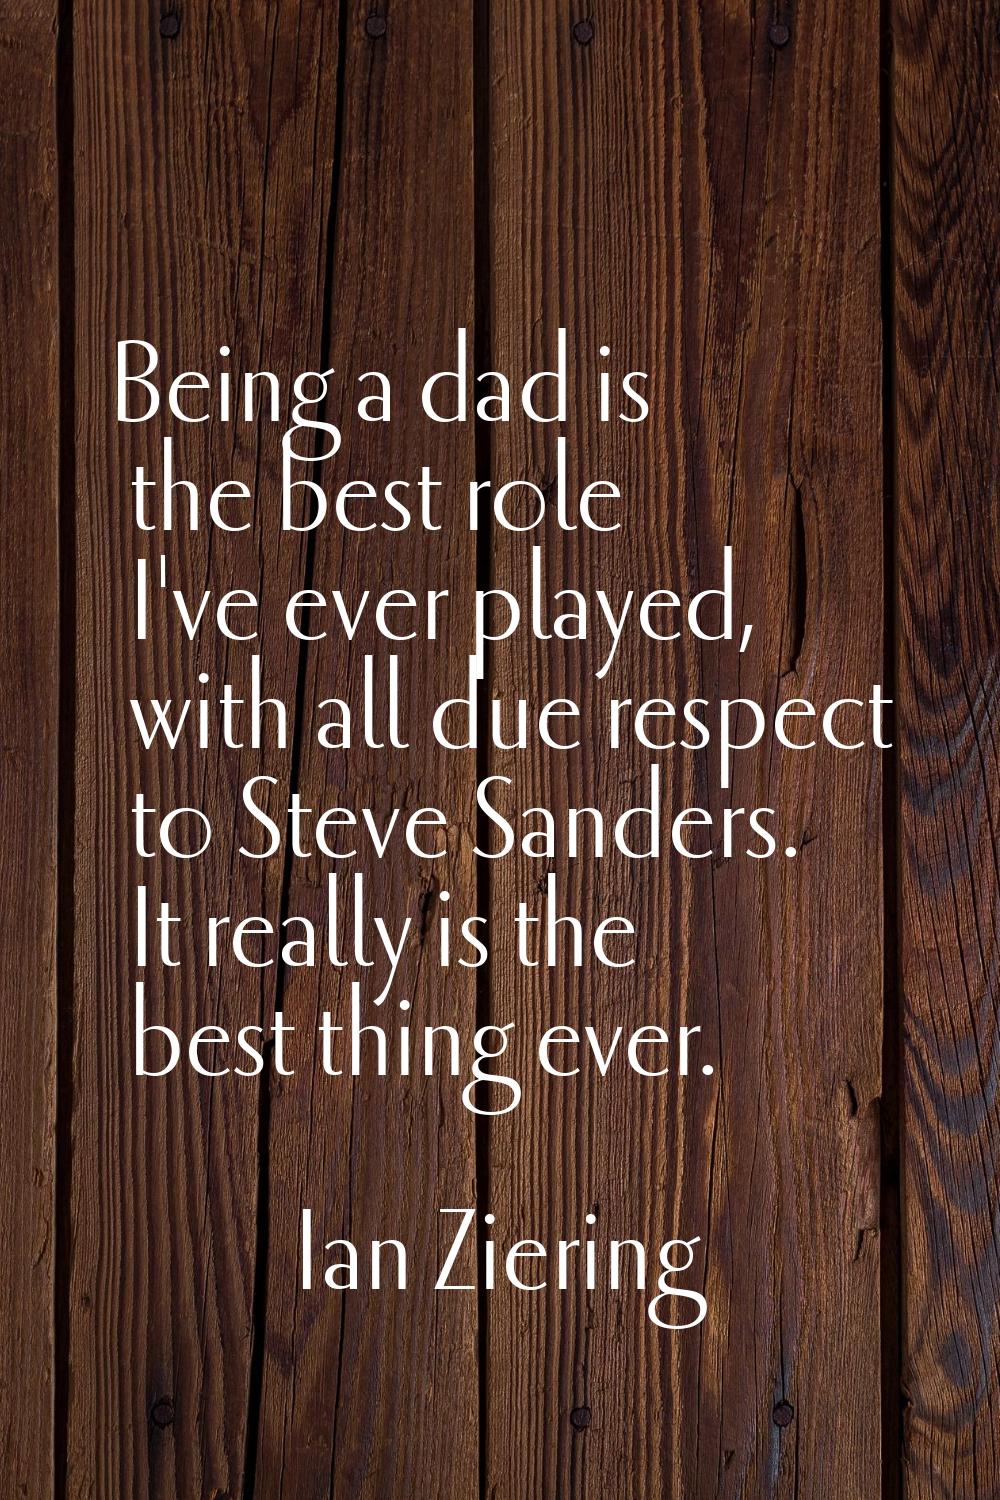 Being a dad is the best role I've ever played, with all due respect to Steve Sanders. It really is 